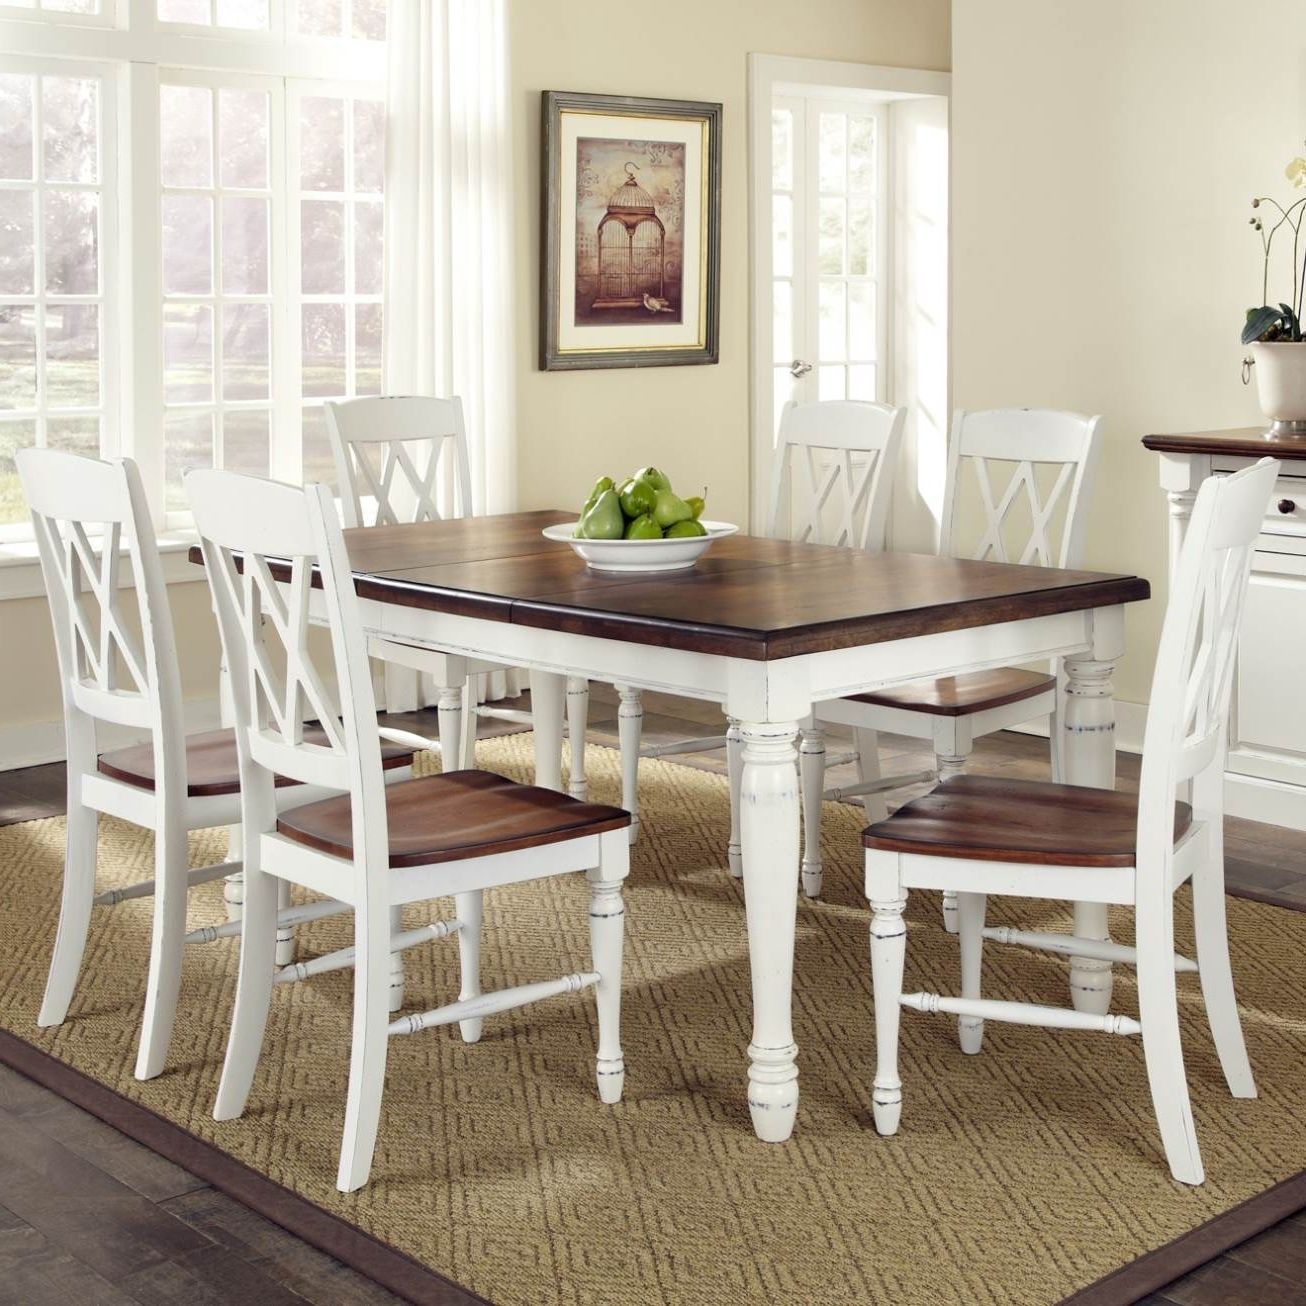 Kitchen Tables Sets For Dining Tables With White Legs And Wooden Top (View 1 of 25)